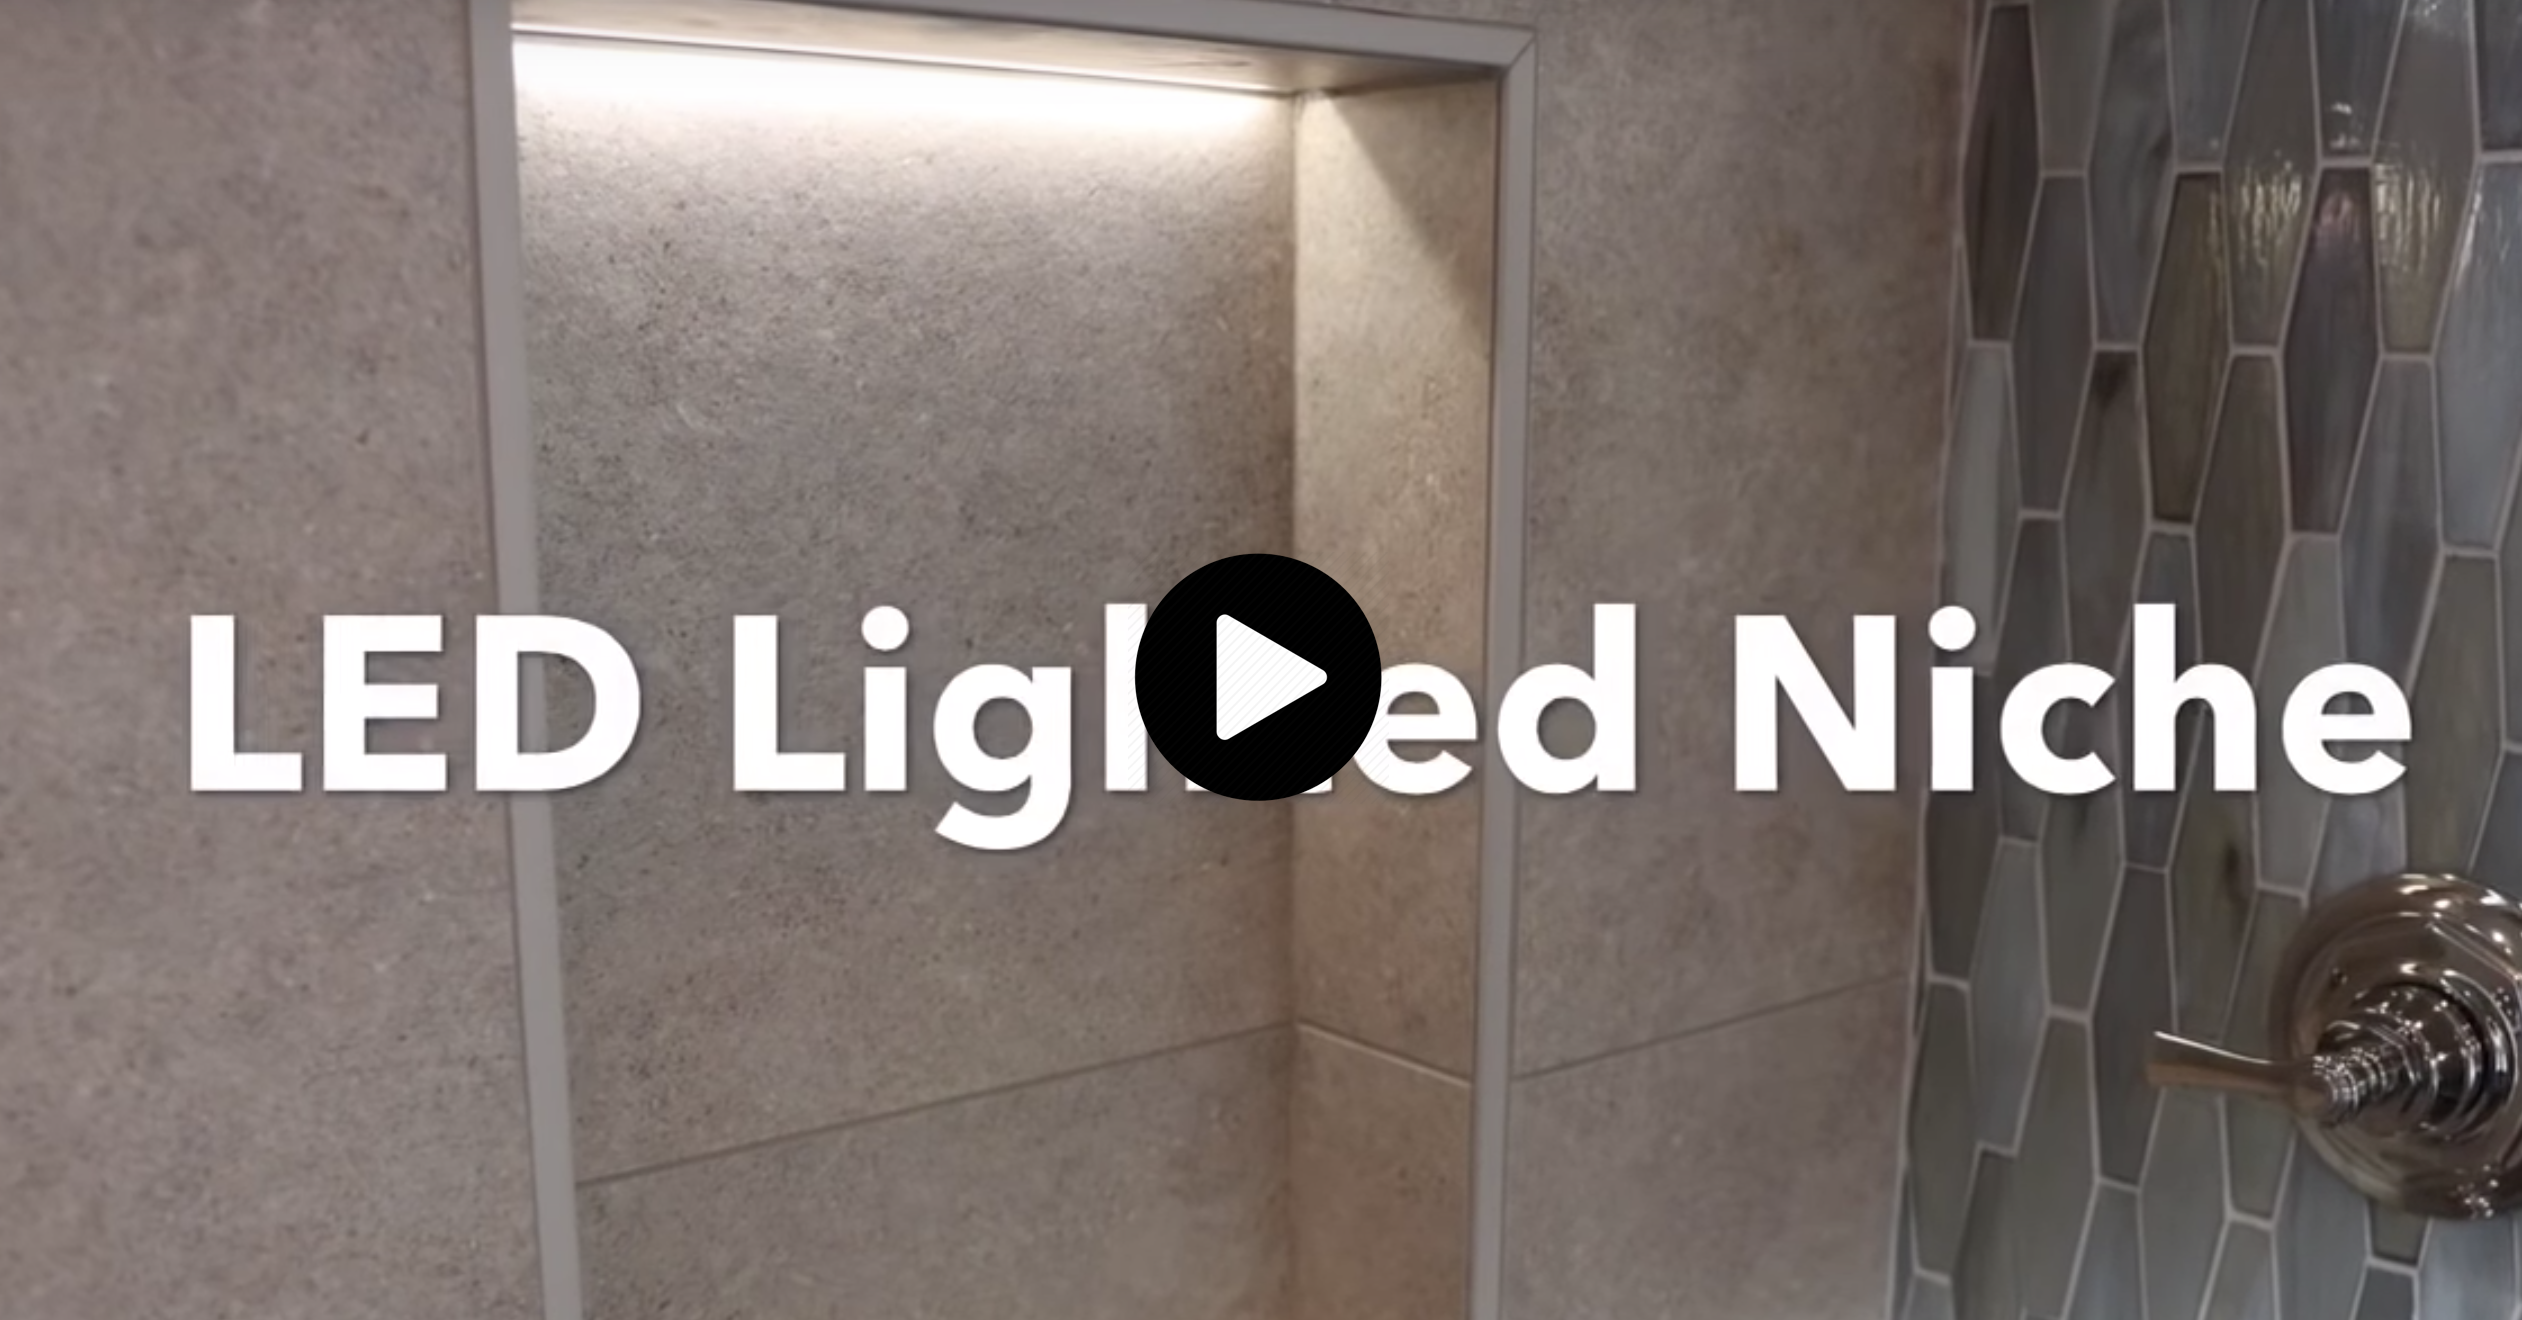 How to Make a Lighted LED Shower Niche Online